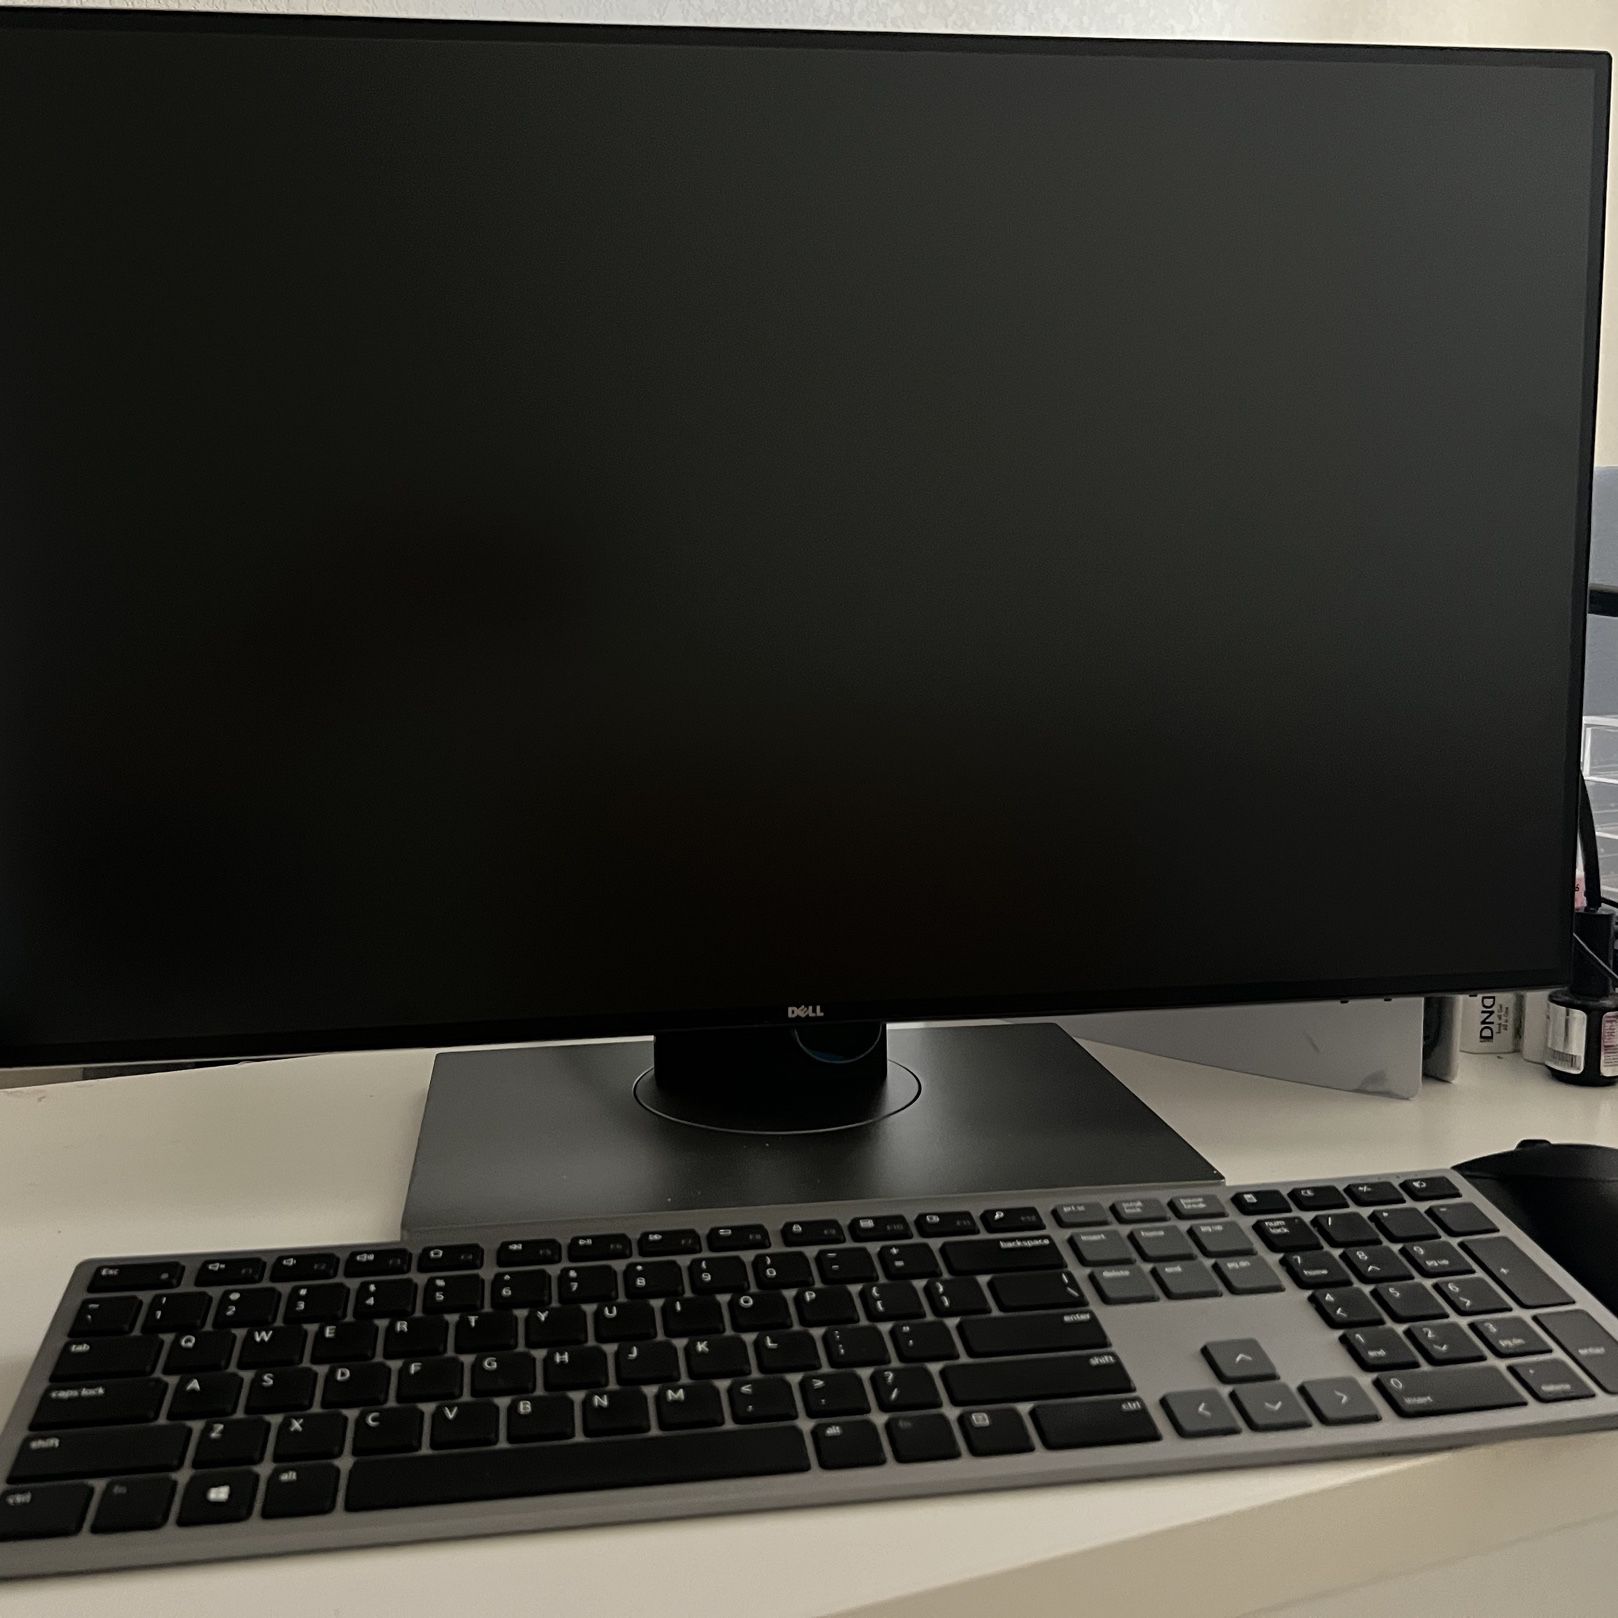 Dell 27 inch monitor like new